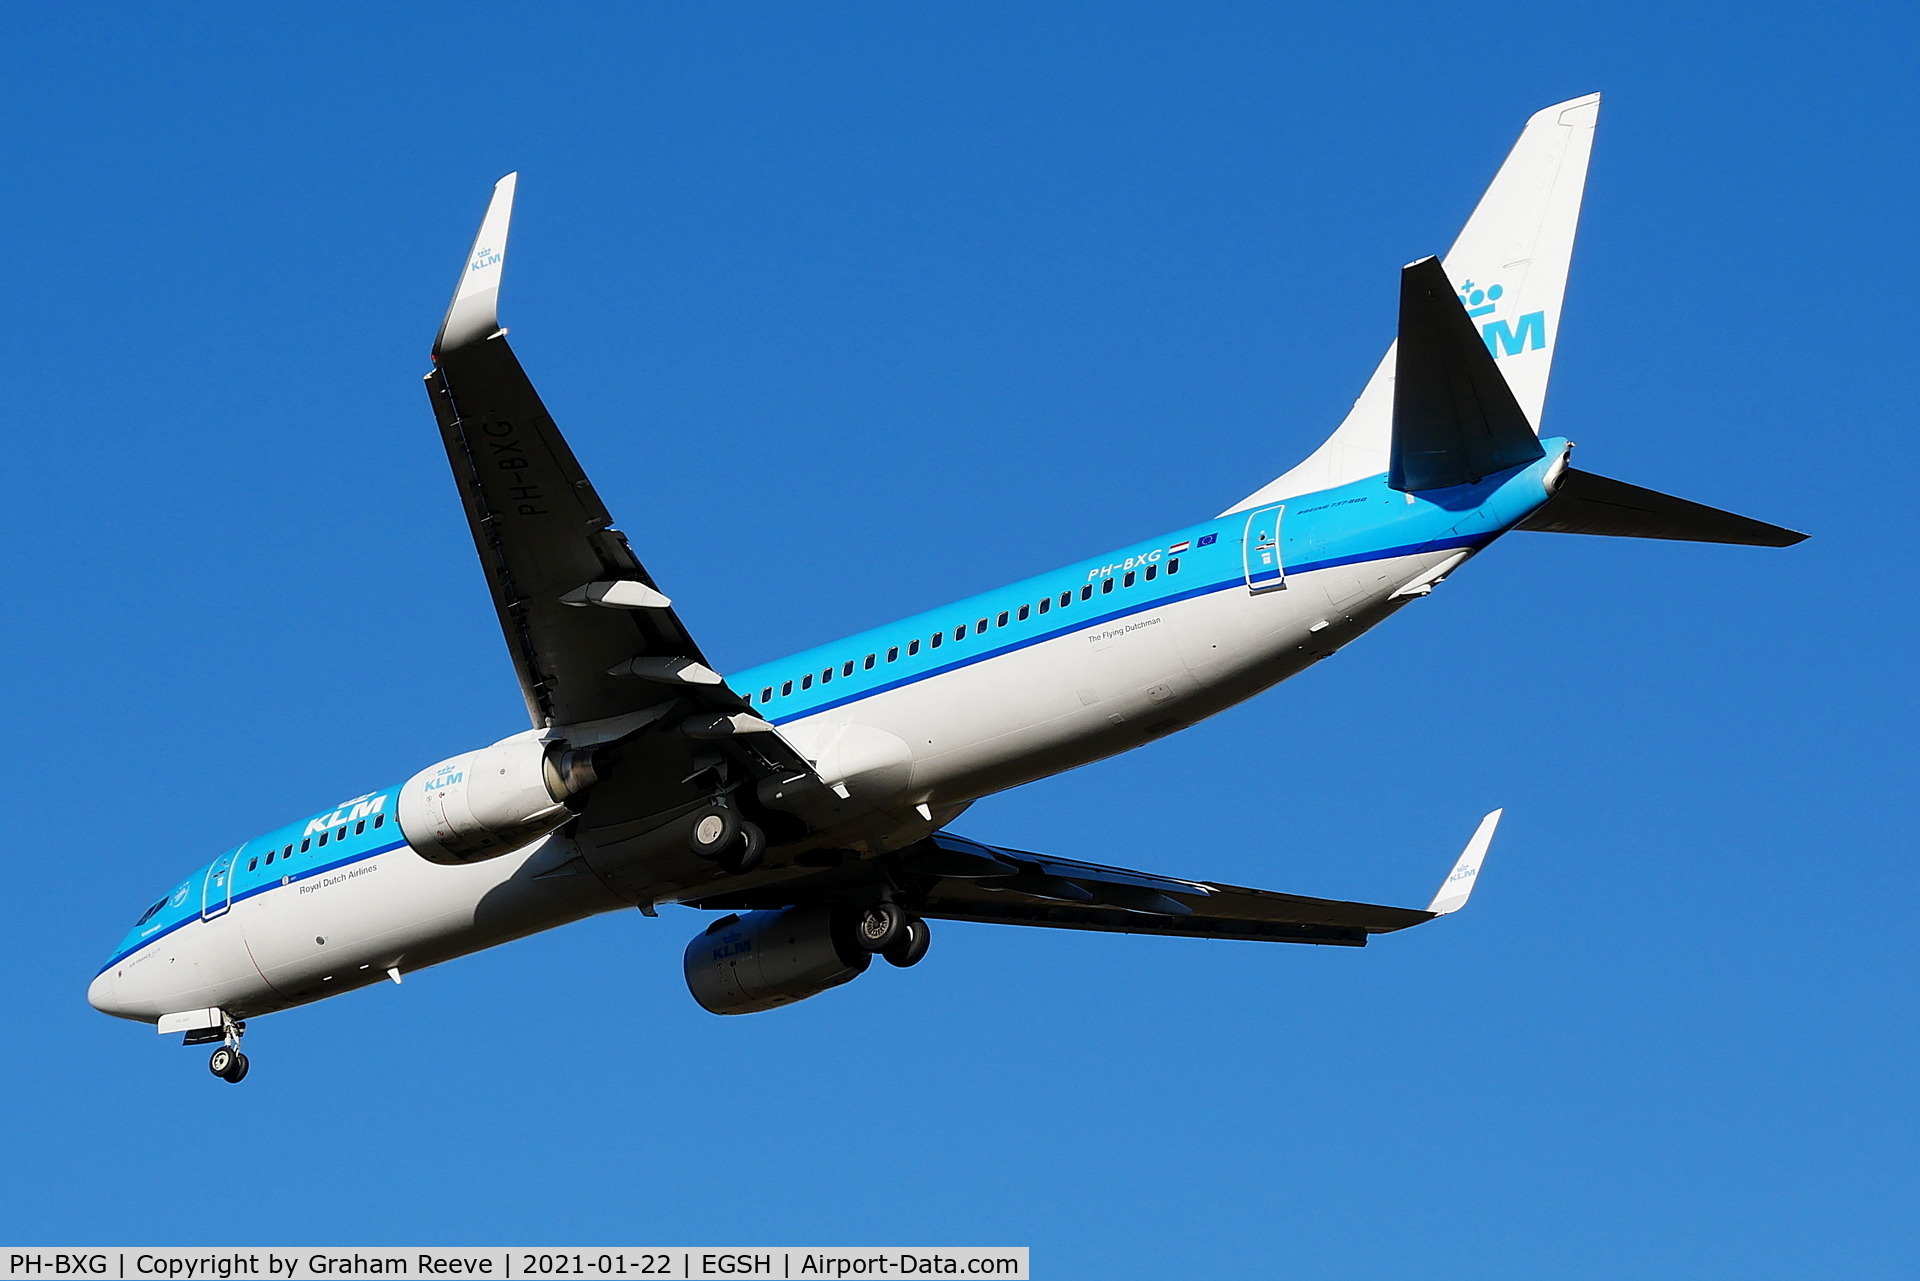 PH-BXG, 2000 Boeing 737-8K2 C/N 30357, On approach to Norwich.